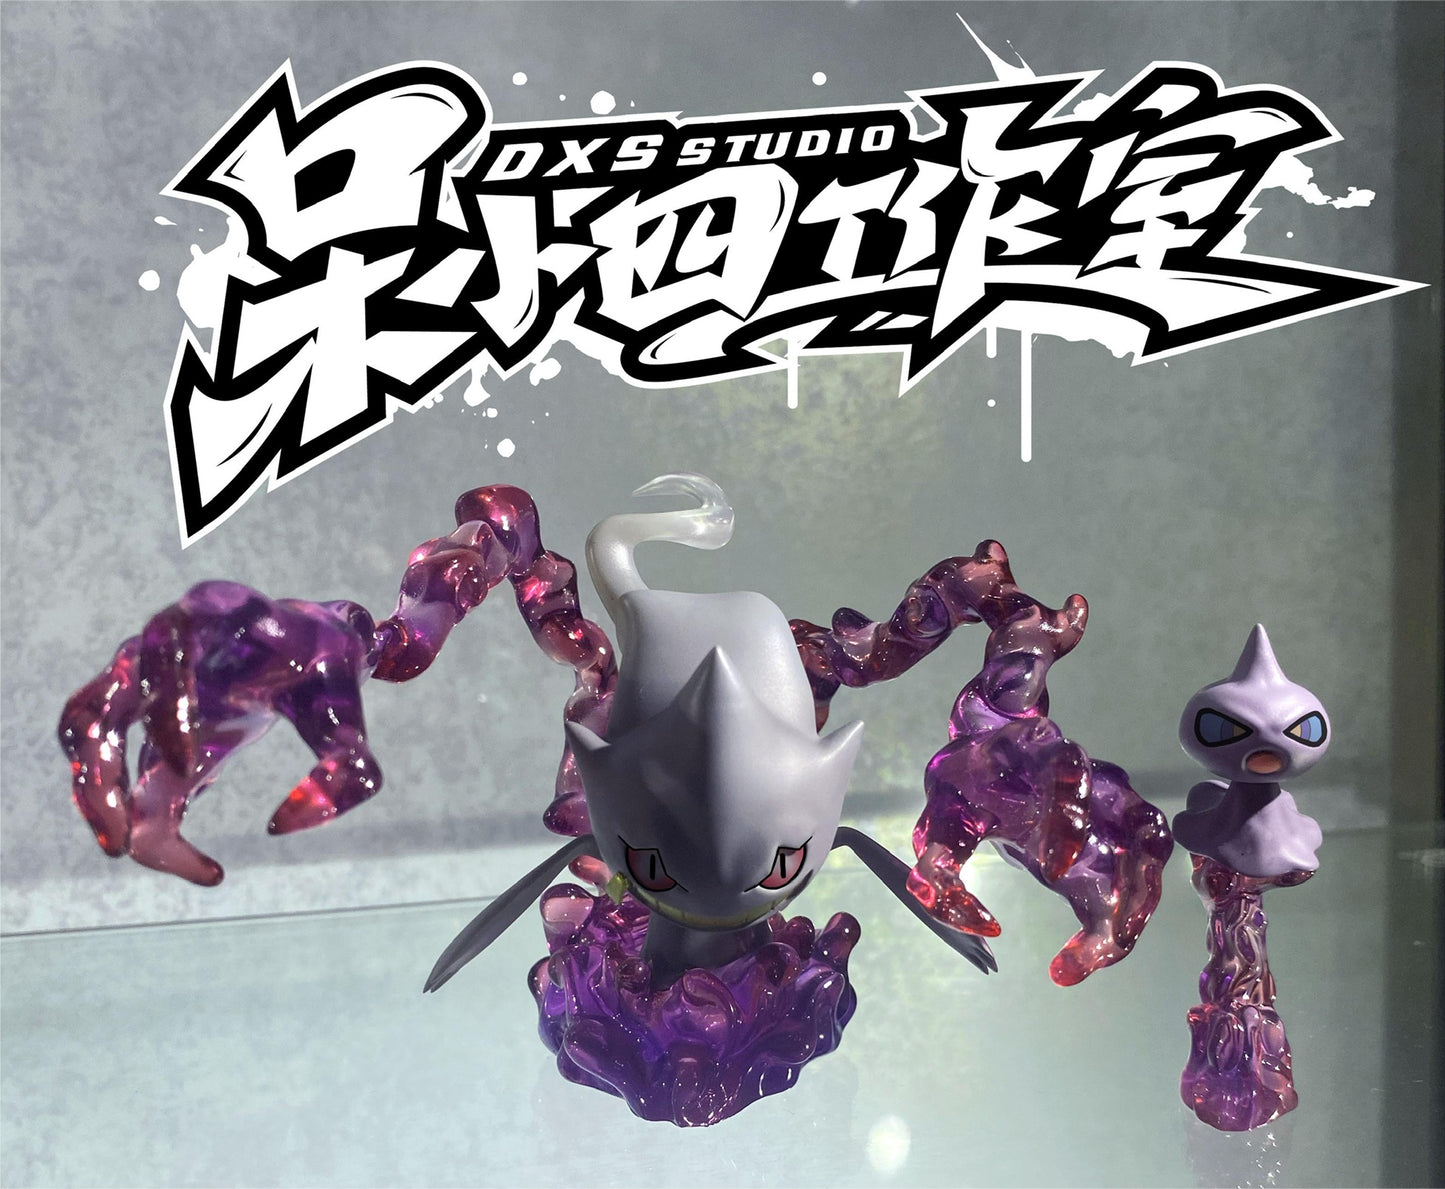 [PREORDER CLOSED] 1/20 Scale World Figure [DXS] - Shuppet & Banette